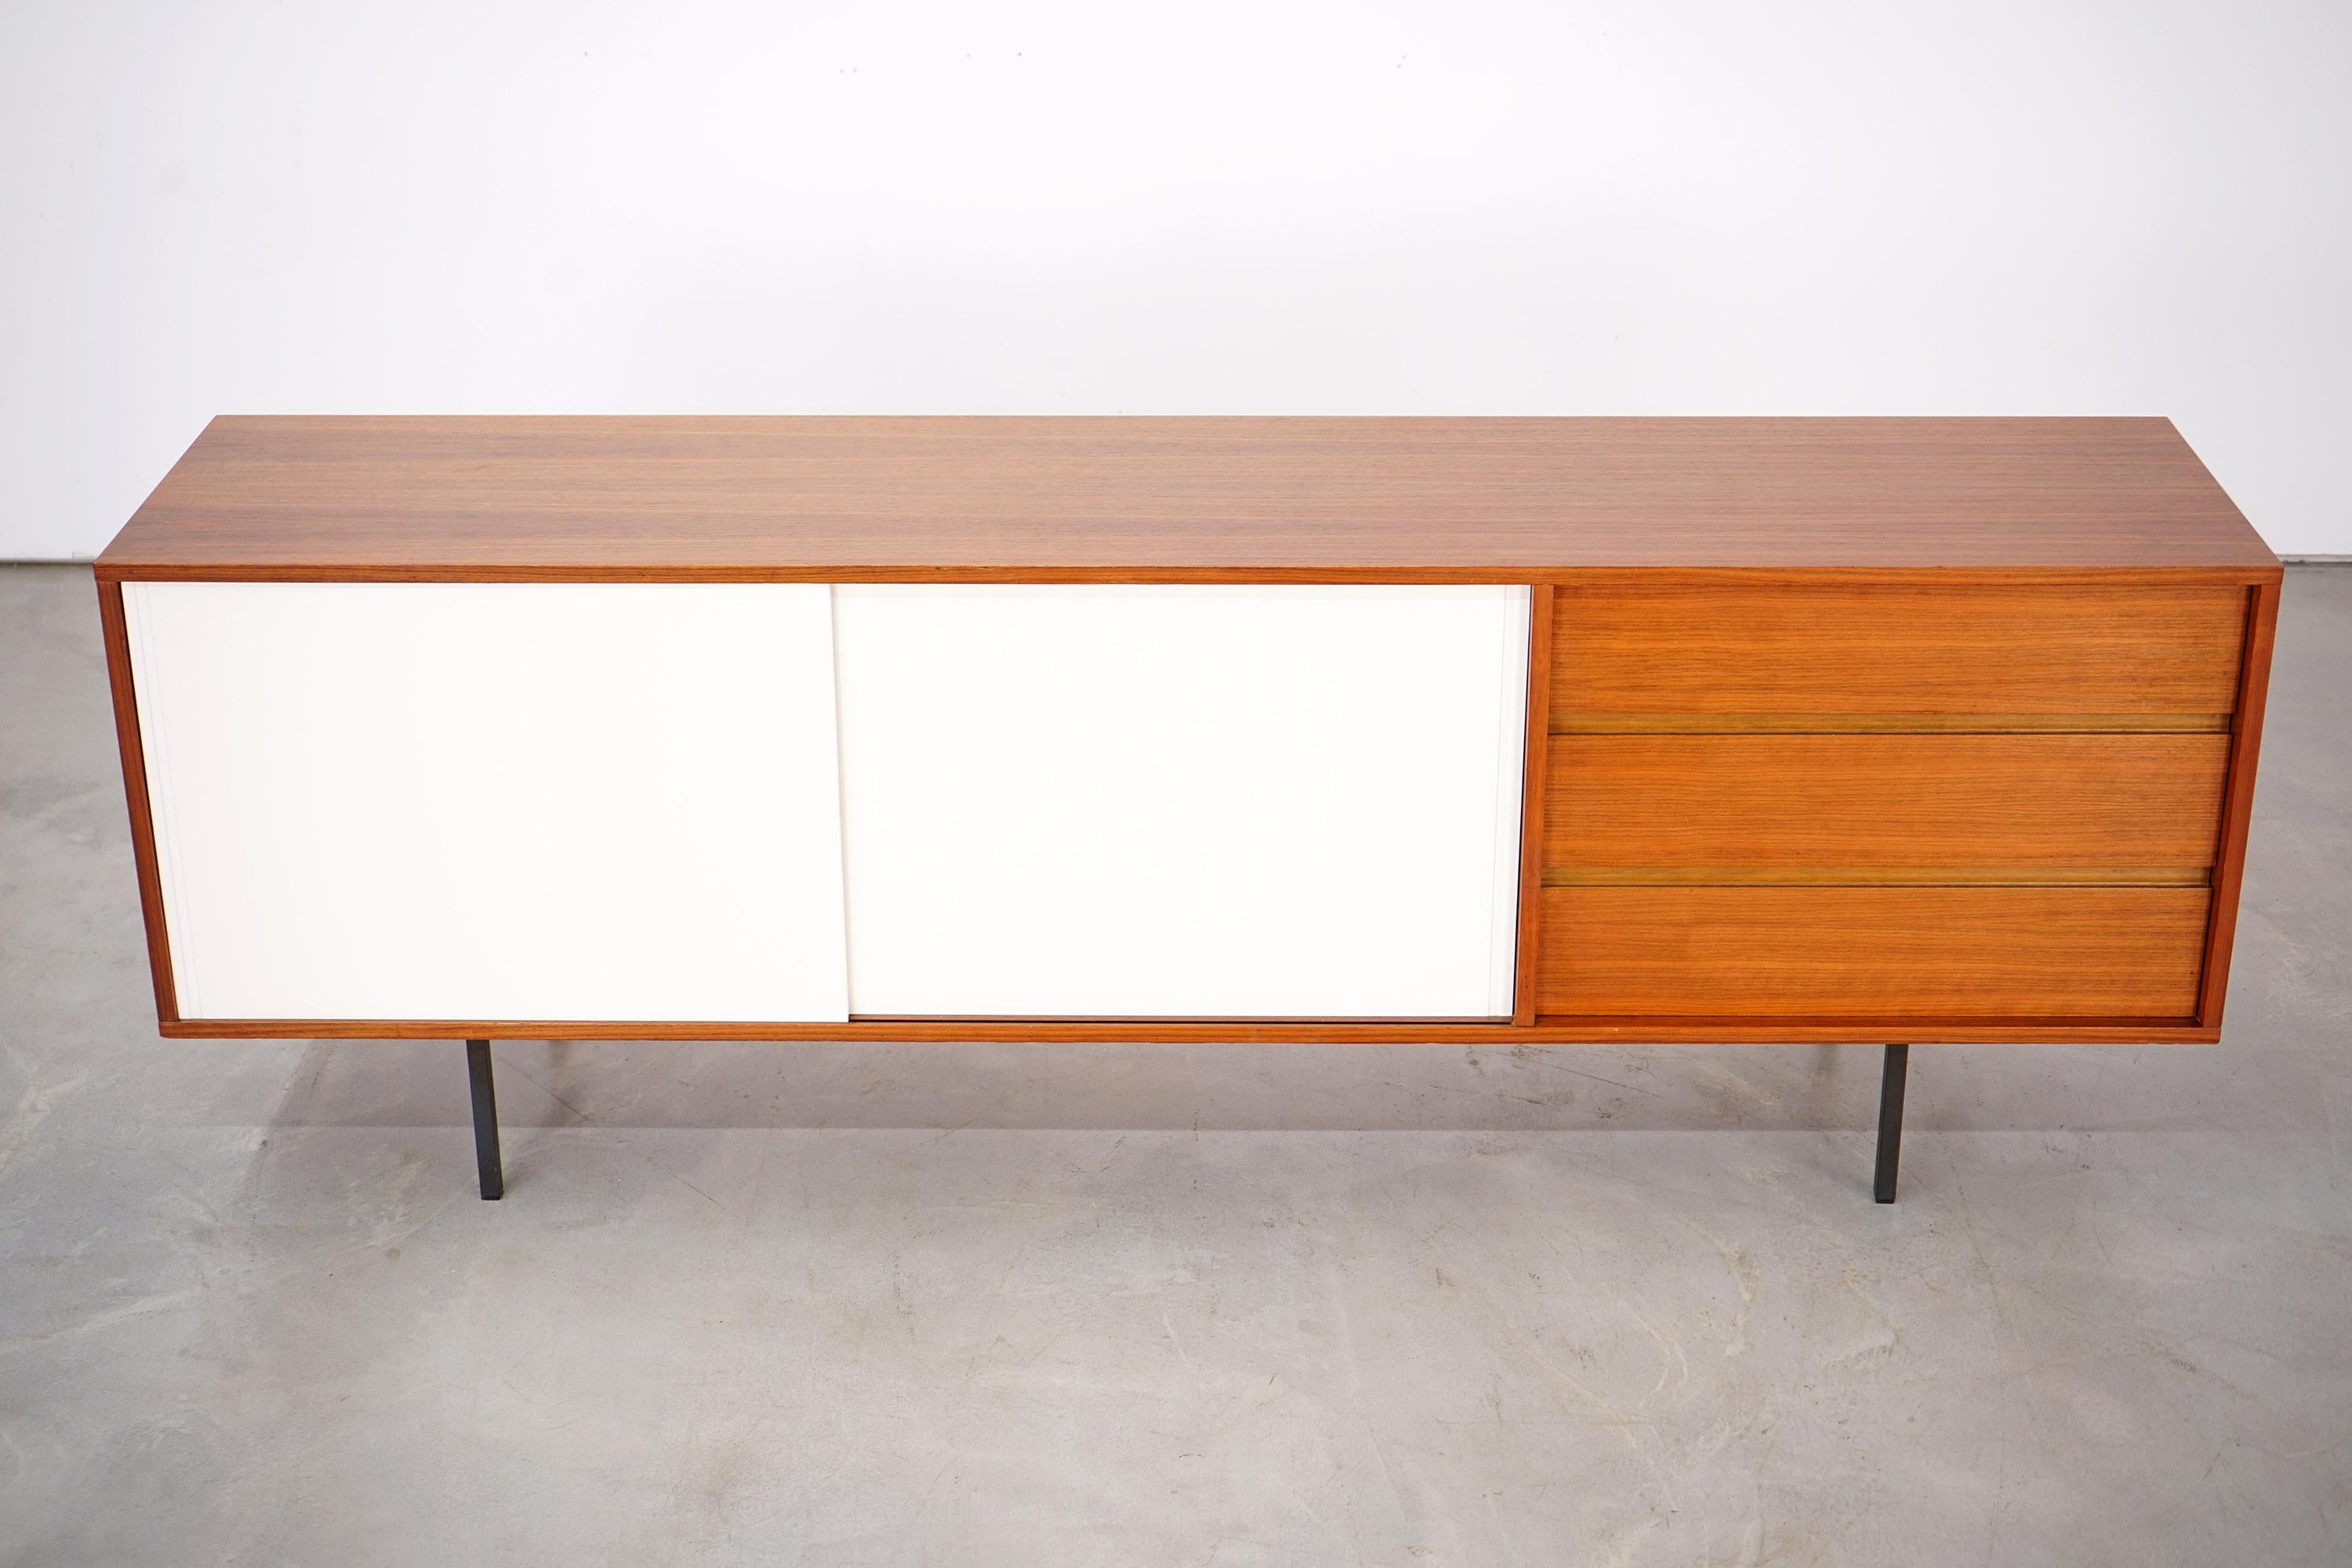 Helmut Magg designed this sideboard in the 1960s. The manufacturer Deutsche Werkstätten made the piece out of nutwood. It rests on a steel frame. The doors of the sideboard are painted white. Hidden behind these doors are two shelves. The piece of